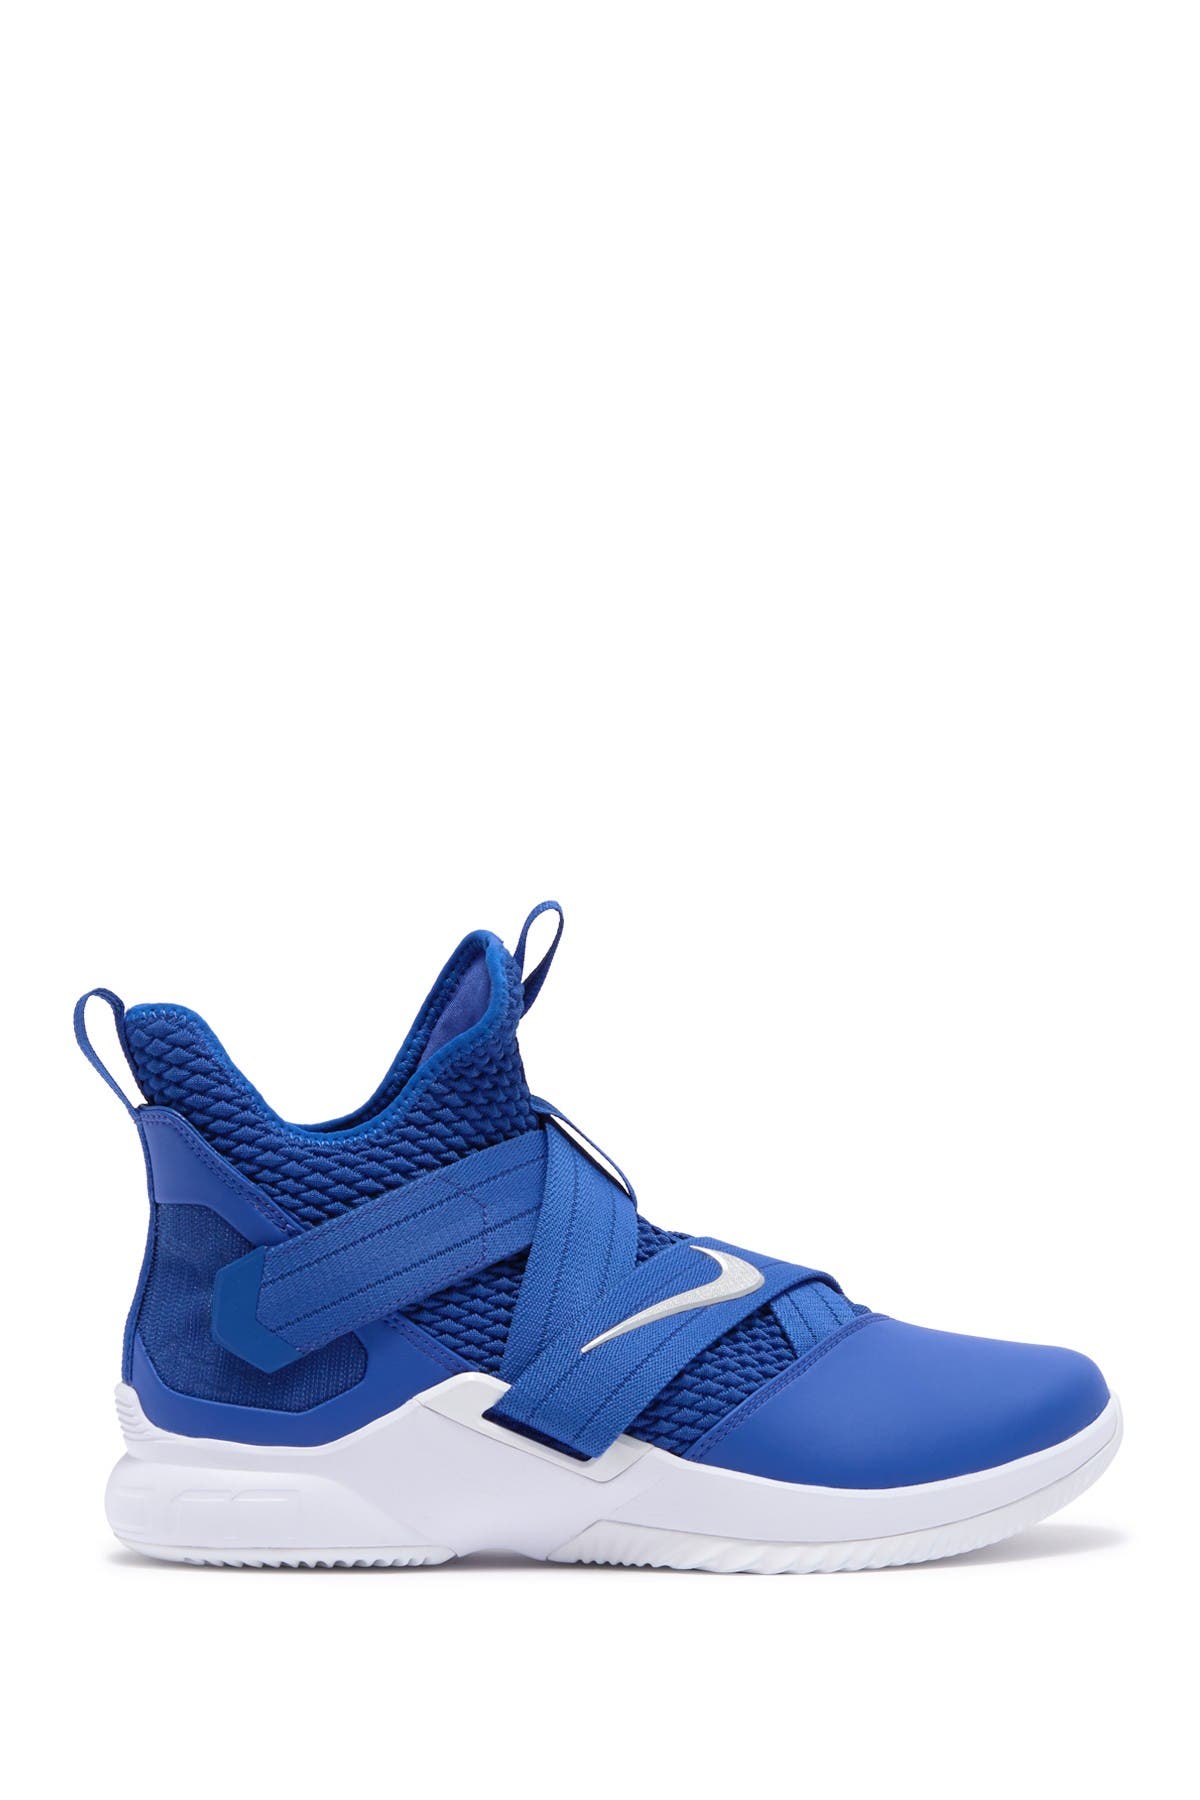 lebron soldier xii tb